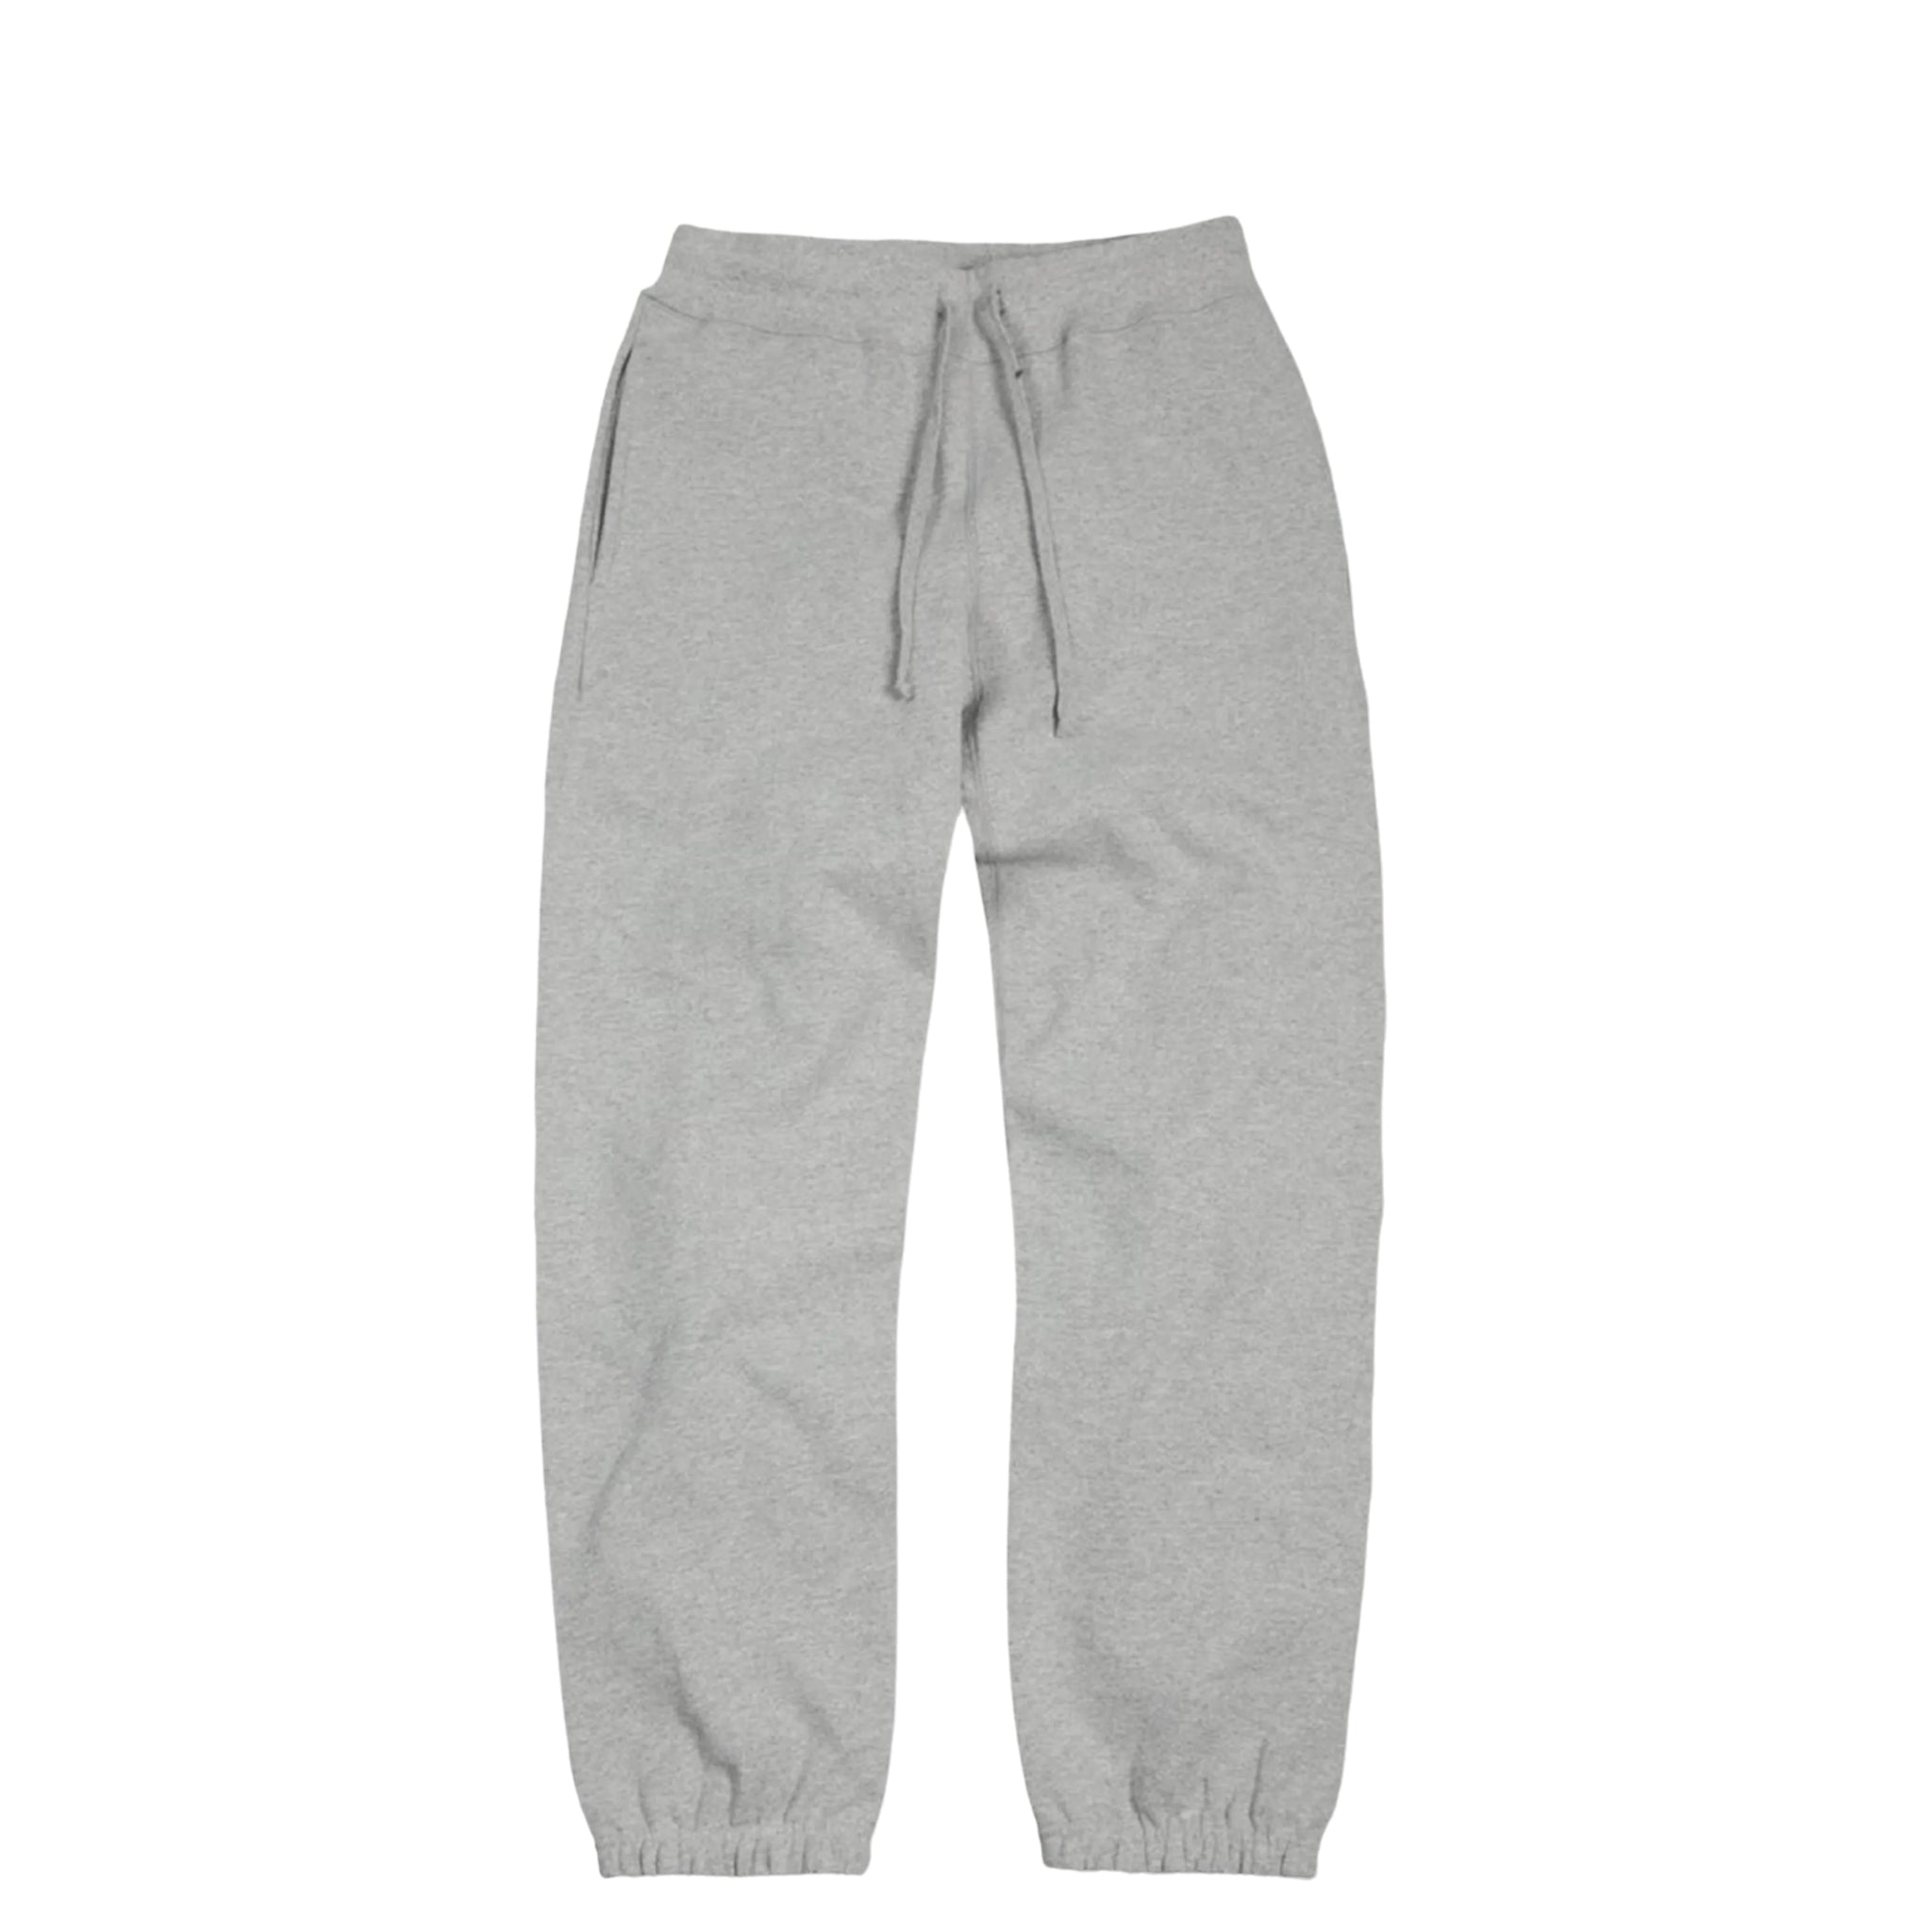 front view of grey heavyweight knit joggers against white background